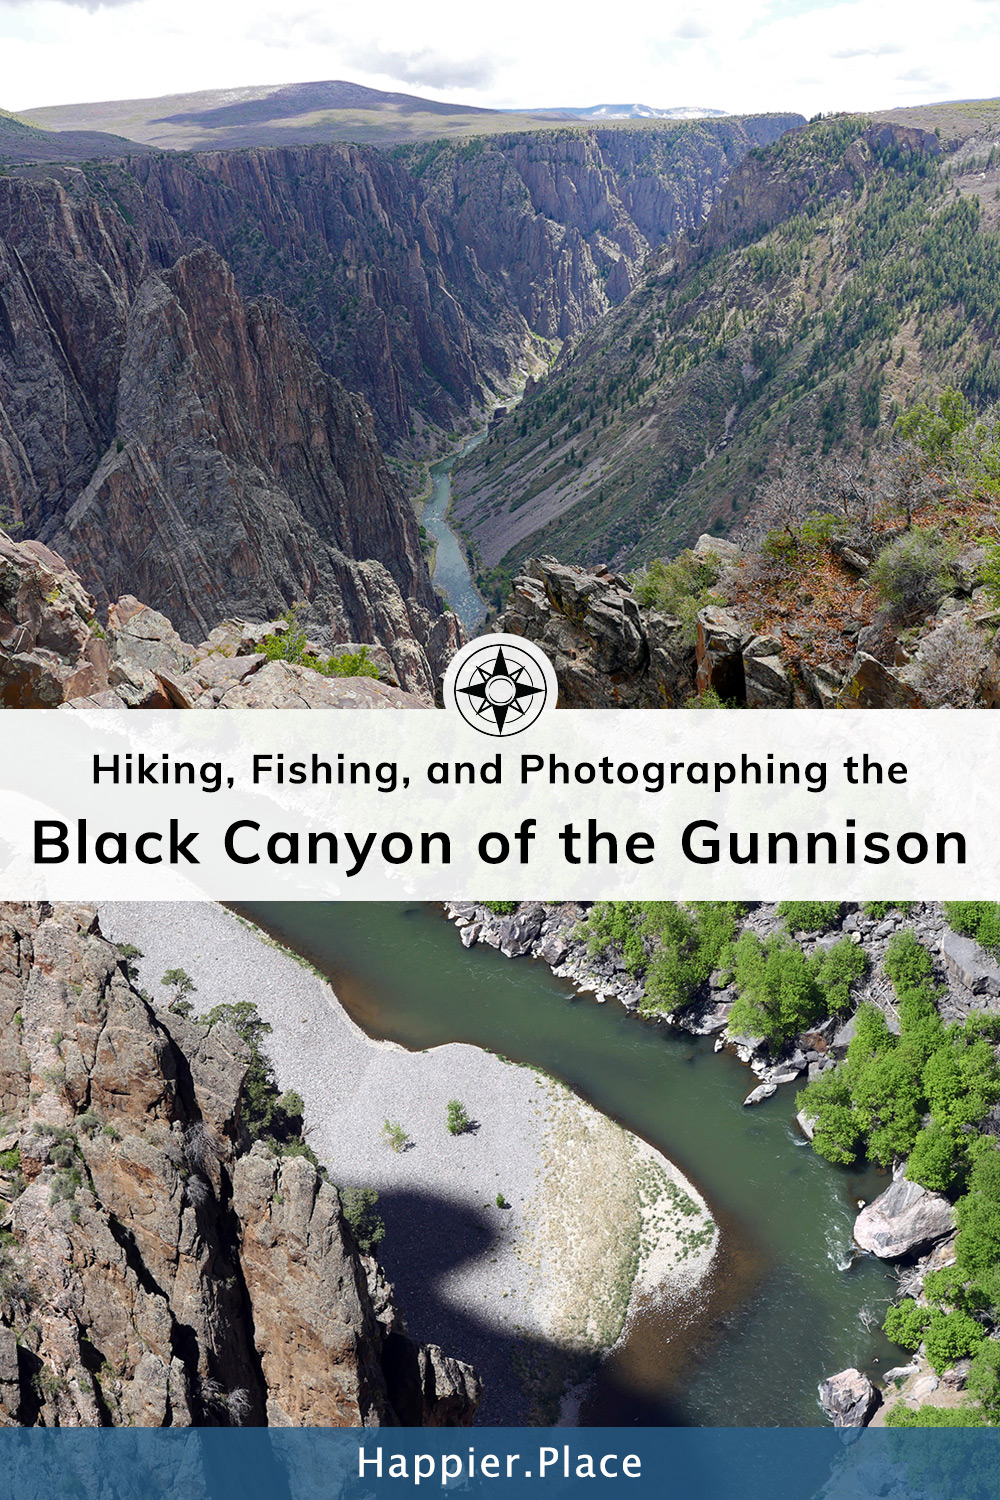 Hiking, Fishing and Photographing the Black Canyon of the Gunnison National Park in Colorado - #HappierPlace #travelguide #Colorado #outdoors #NationalPark